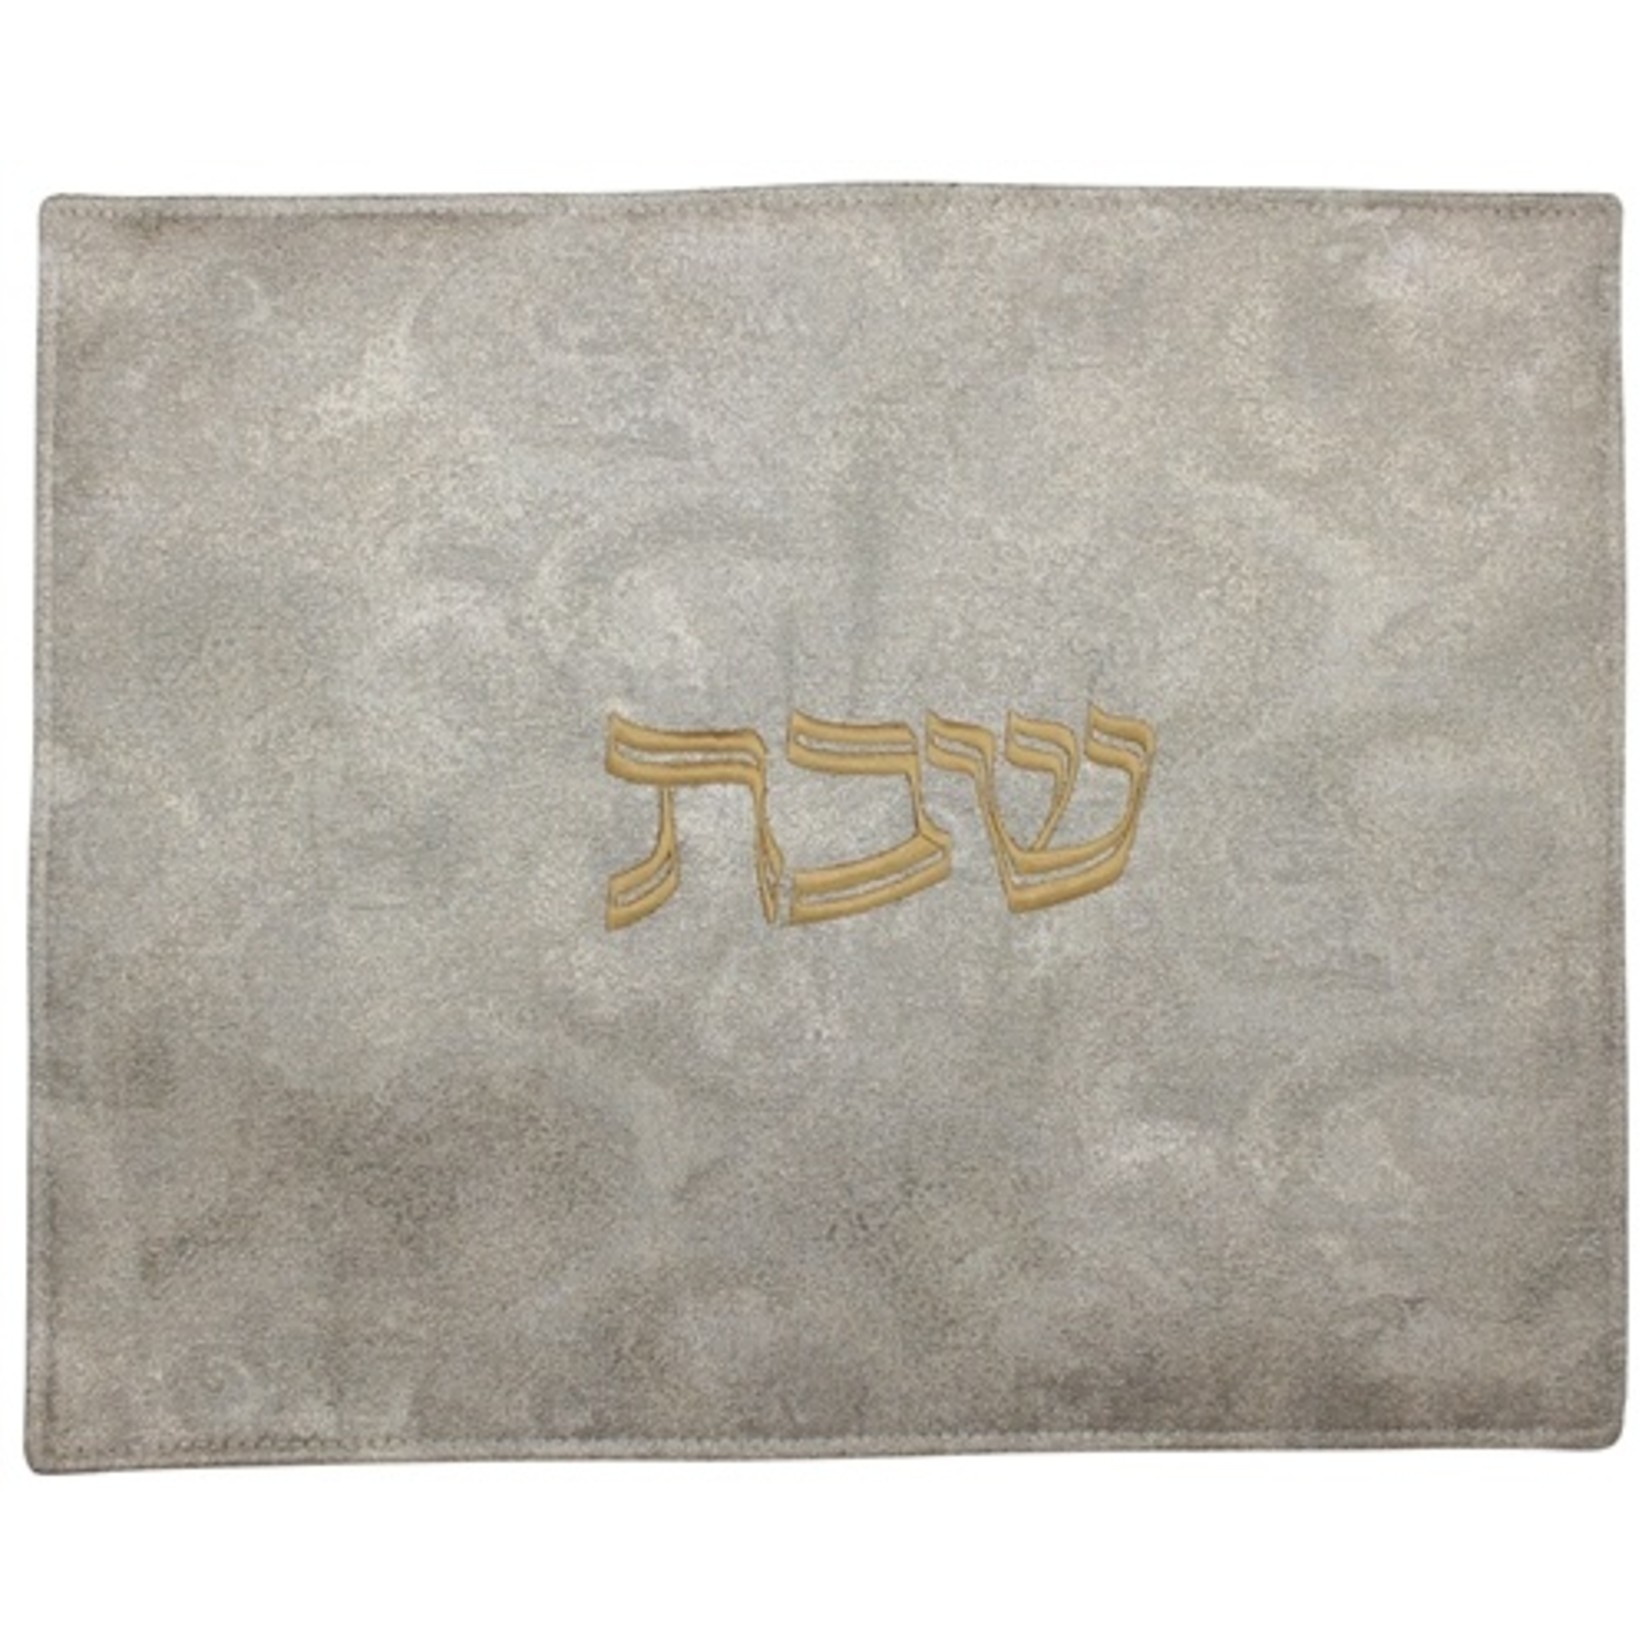 Majestic Challah Cover Jacquard #CC516 - 22"W X 17"H - Double Sided (Side 1 1210- Side 2 - 1211)